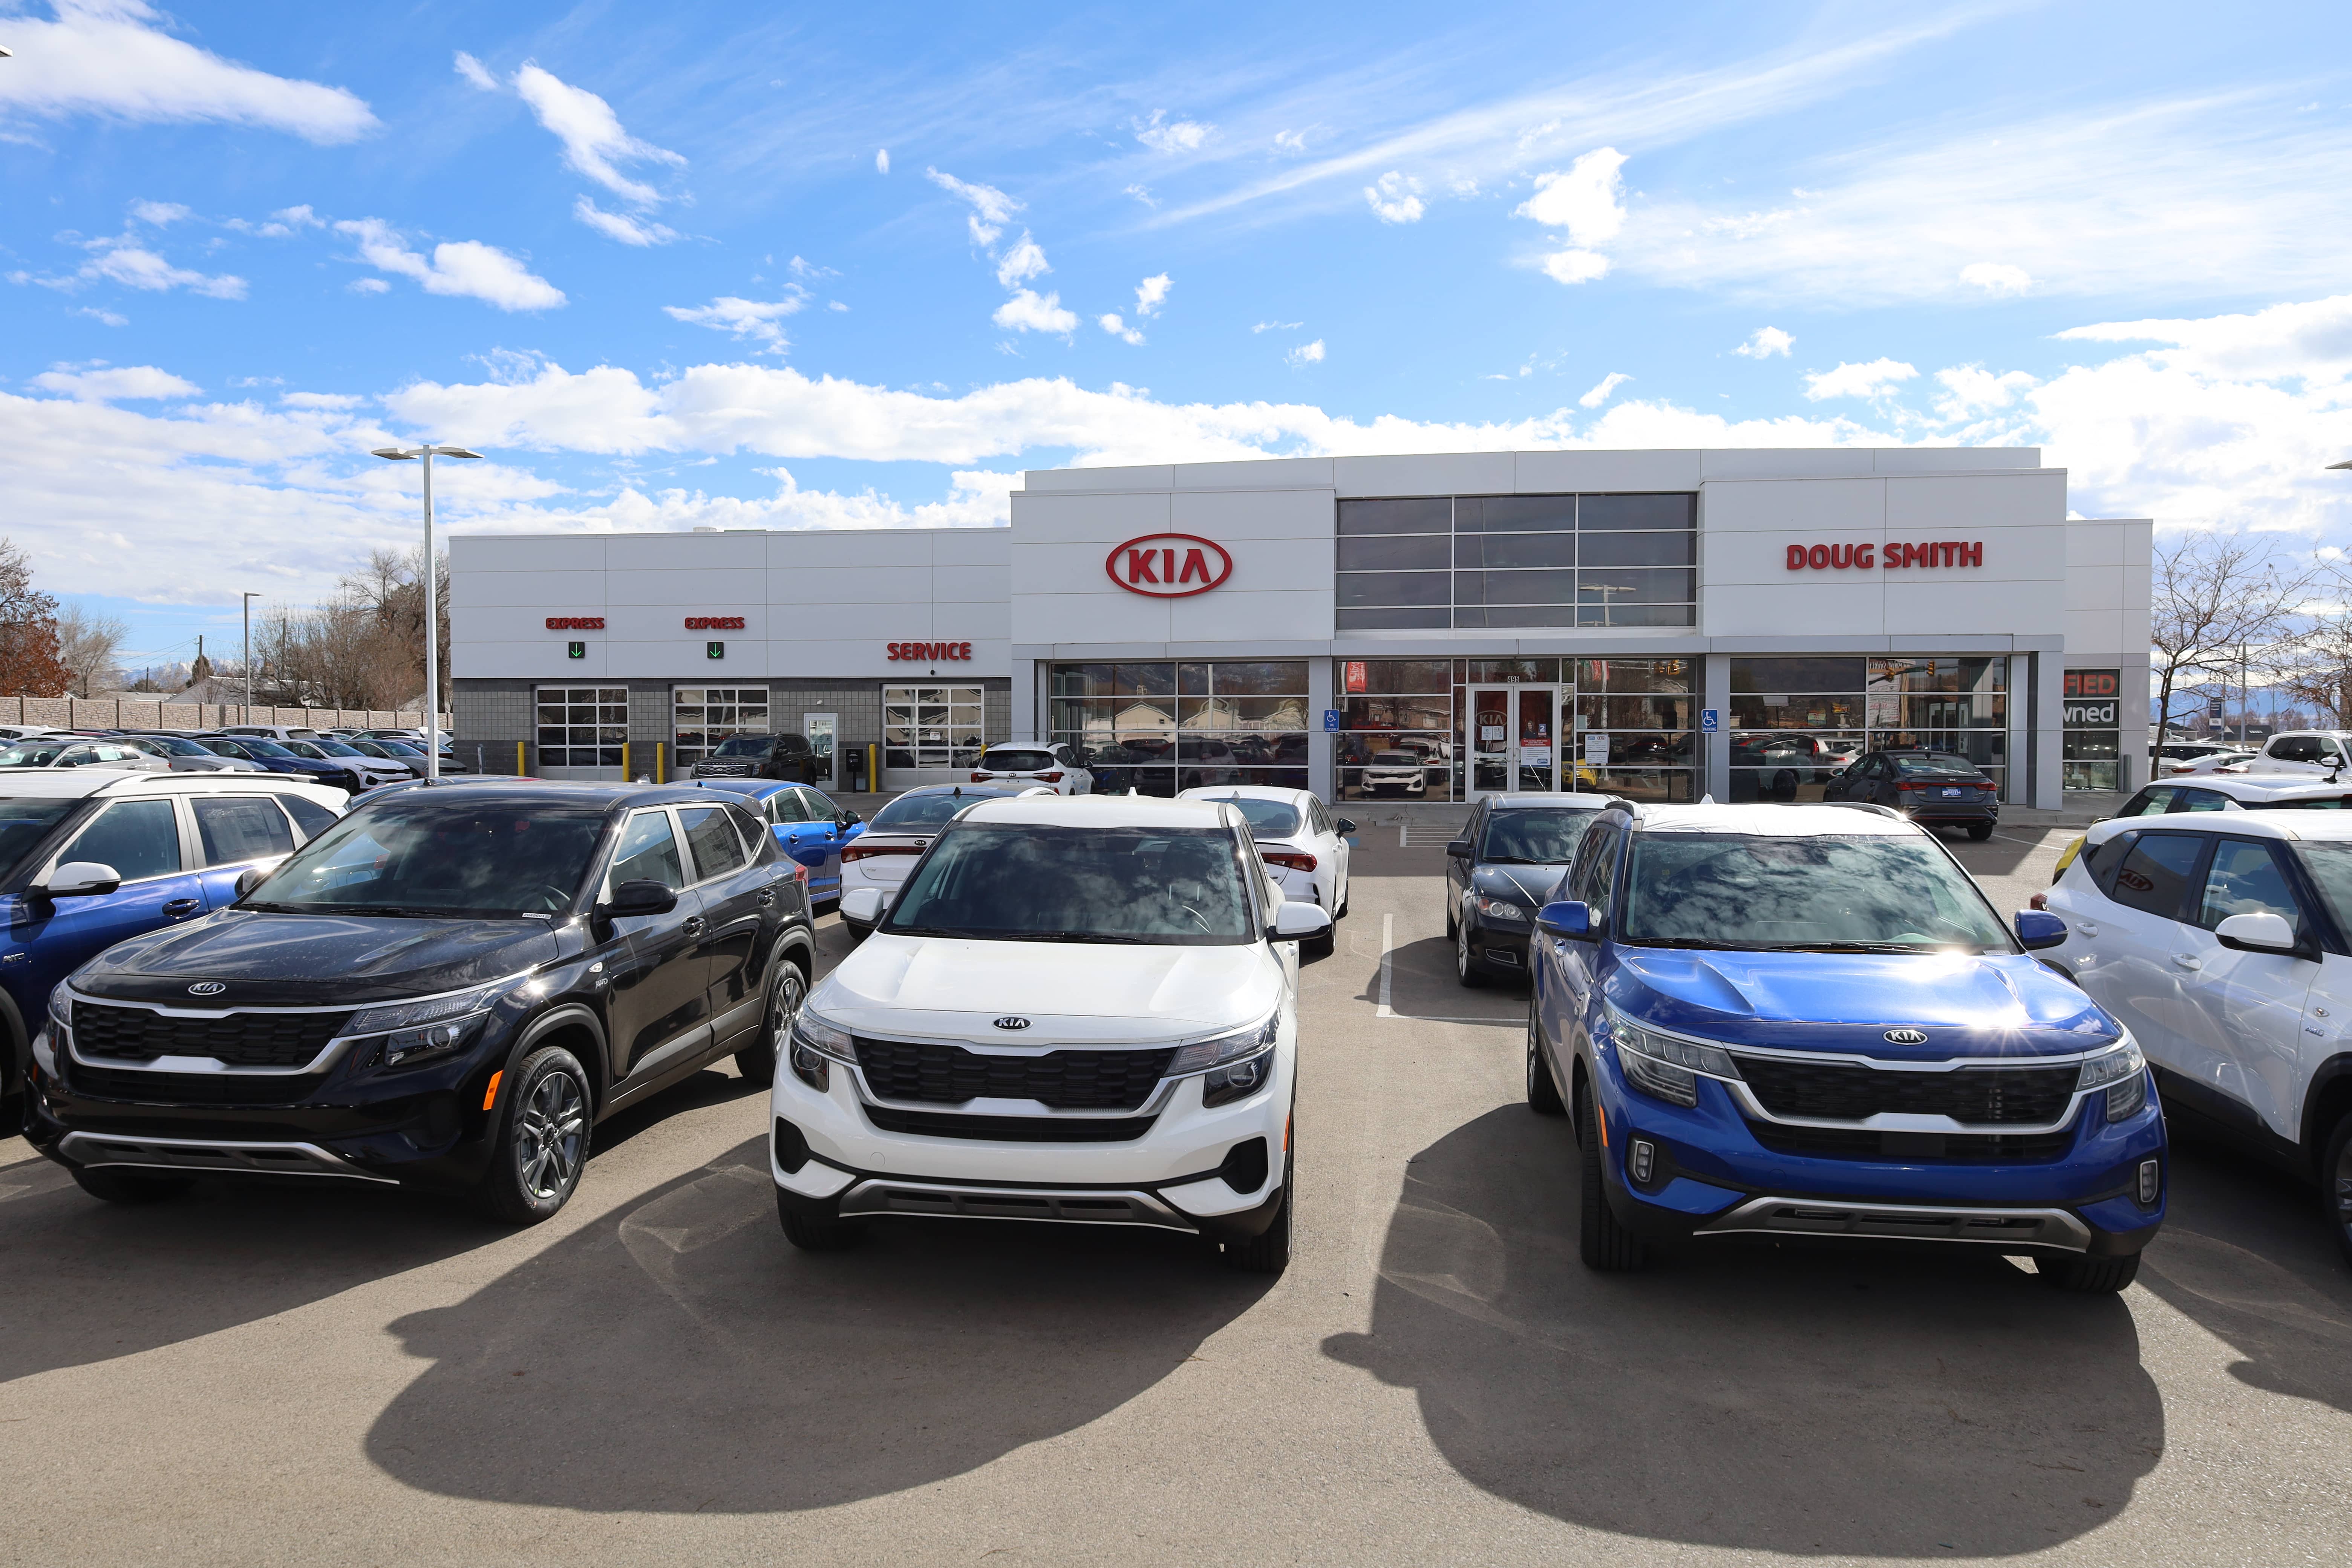 We have all types of models to fit your needs. Come check out our large car lot with many options! Doug Smith Kia in American Fork, UT.